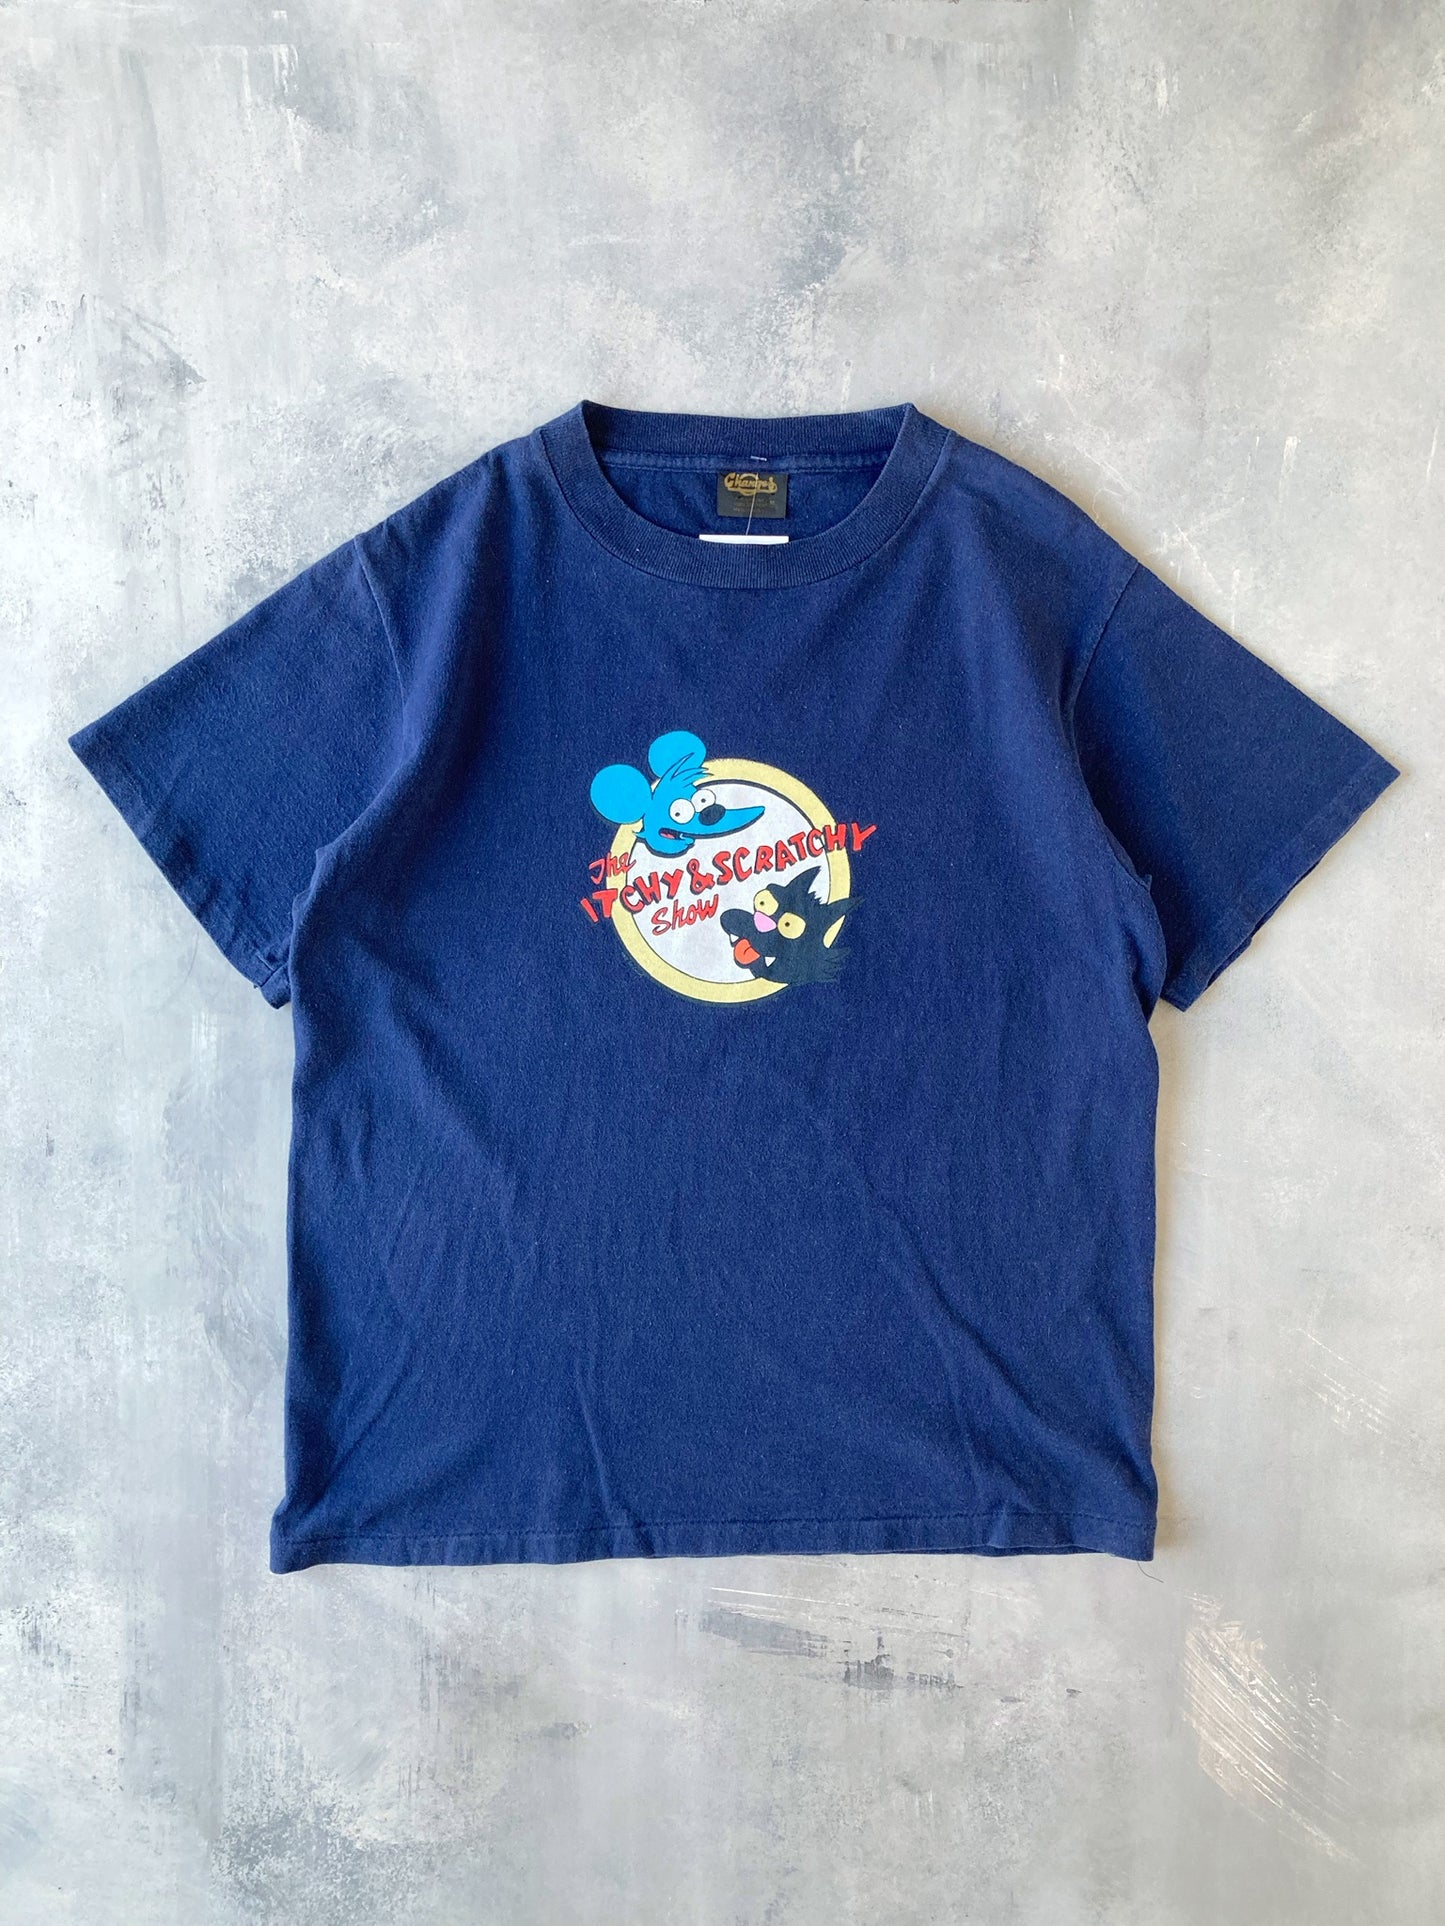 Itchy & Scratchy T-Shirt 90's - Medium